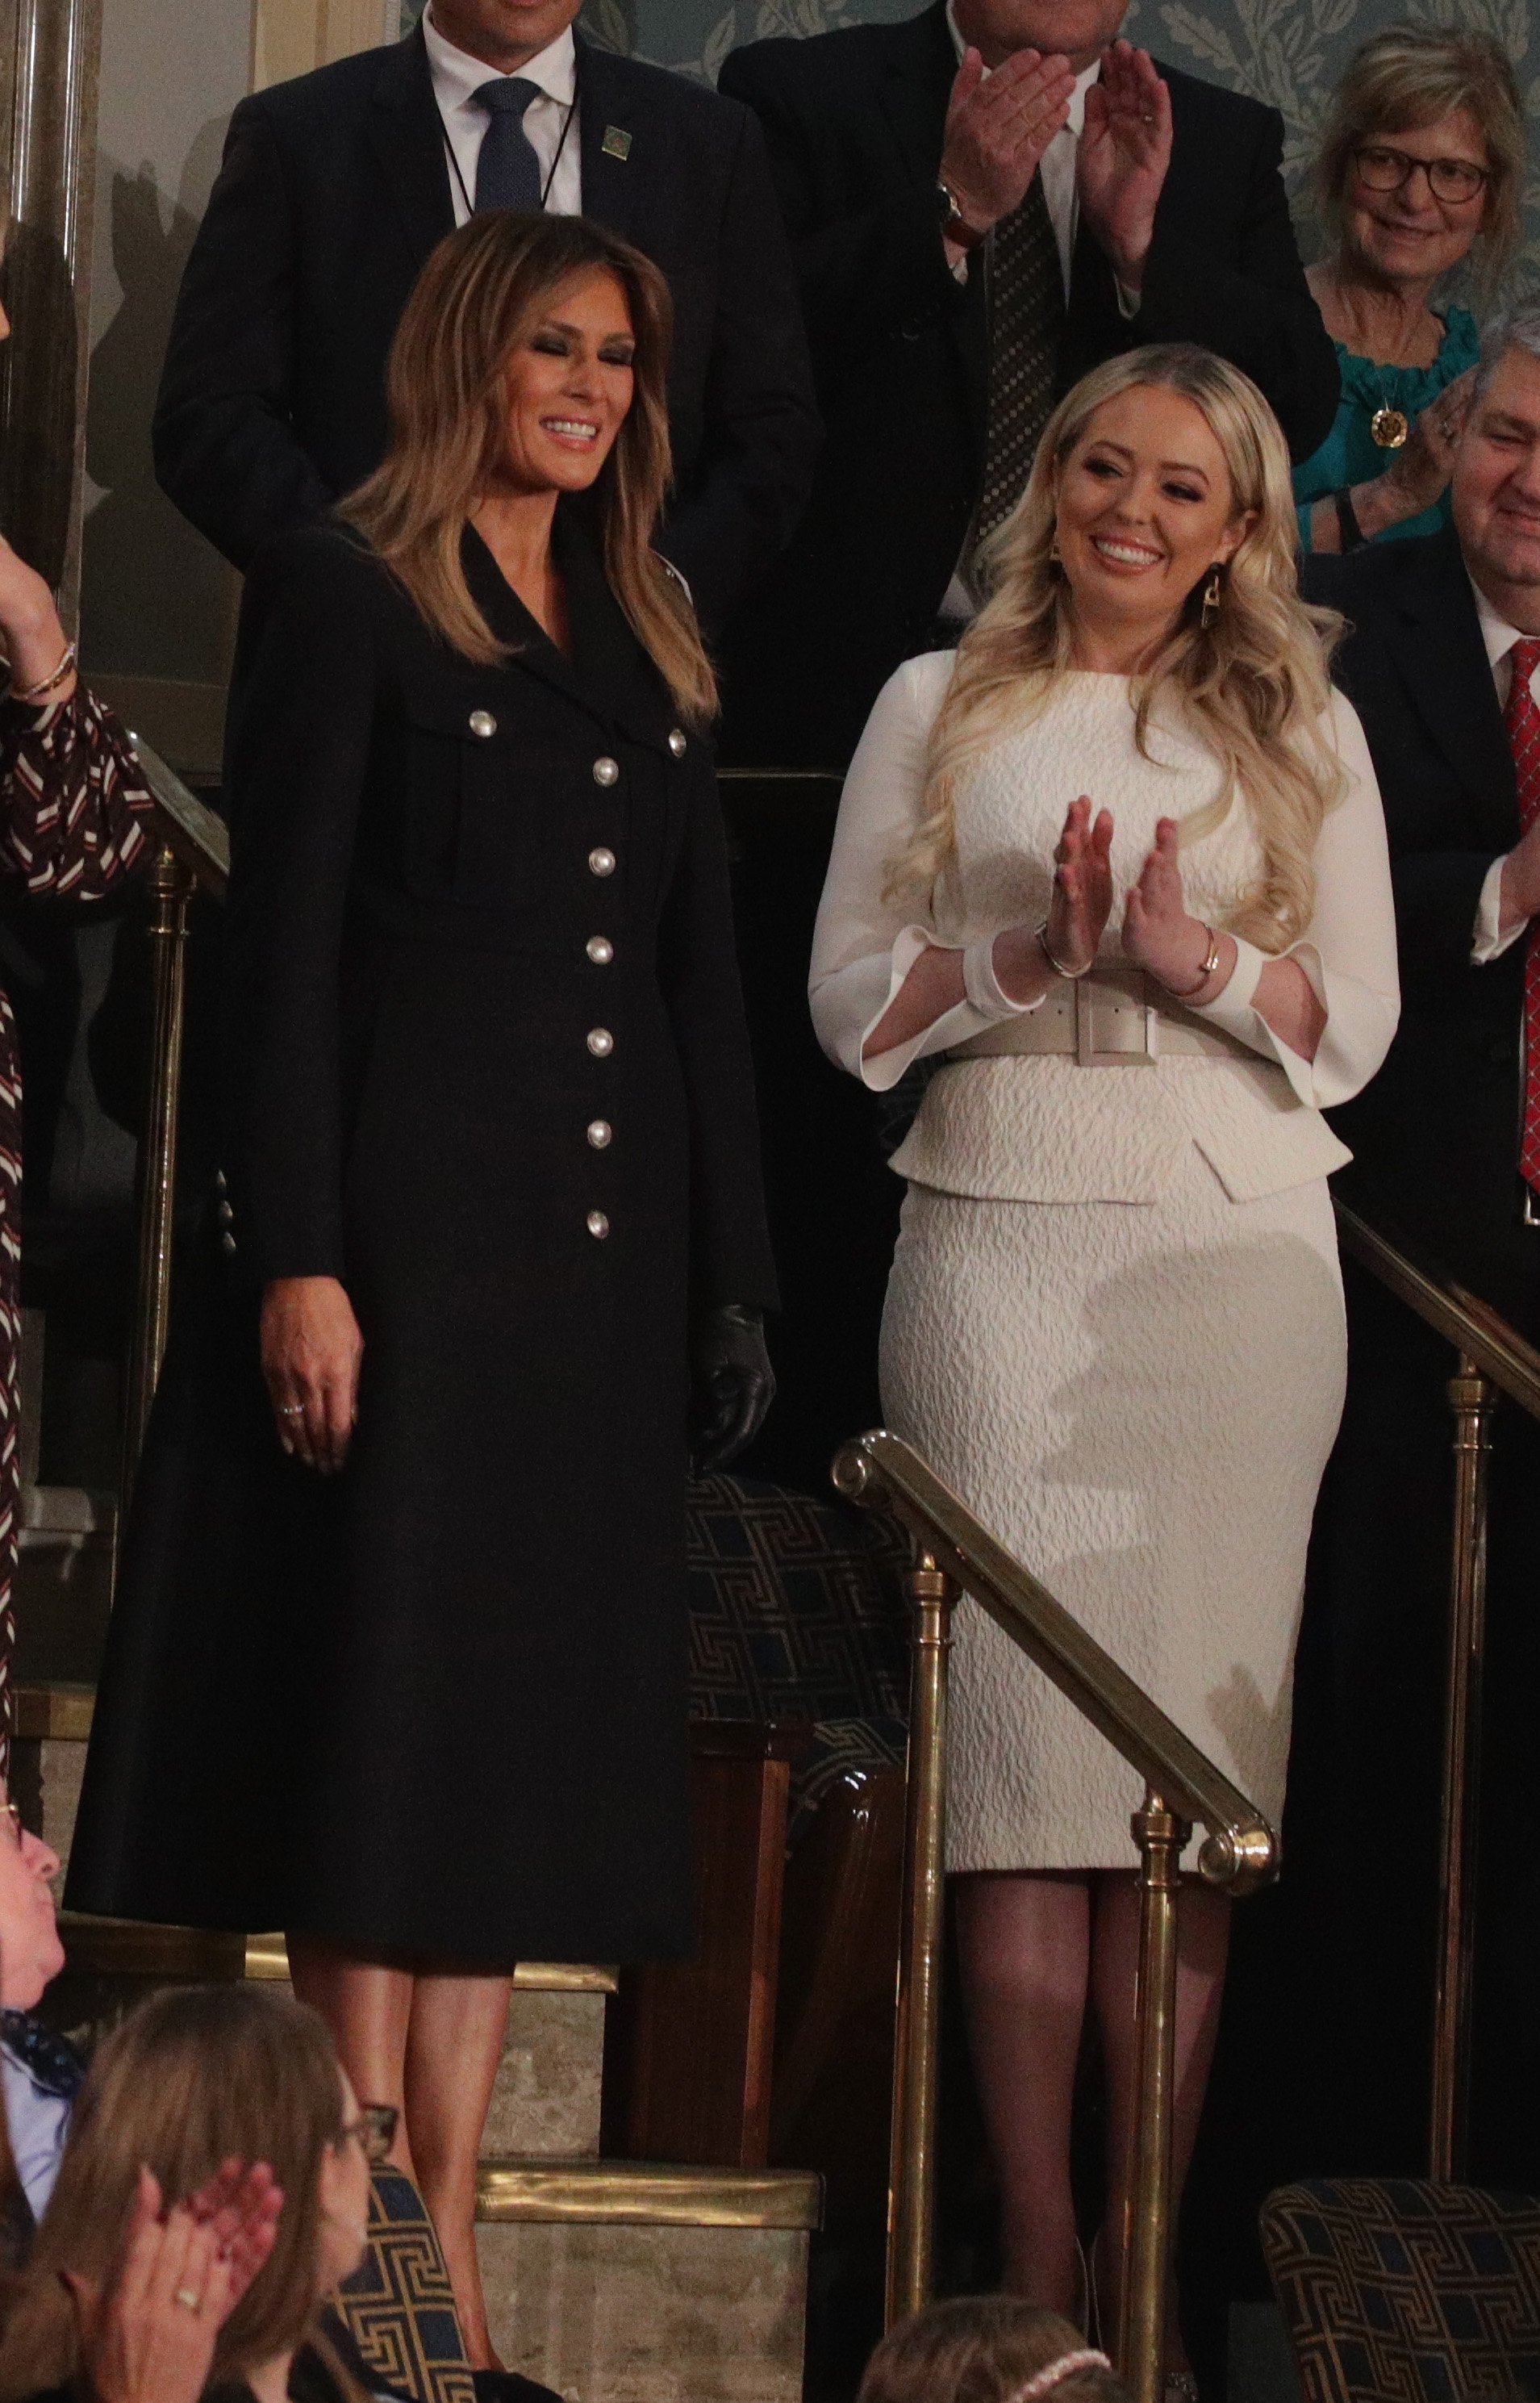 Melania and Triffany Trump at the 2019 SOTU | Photo: Getty Images